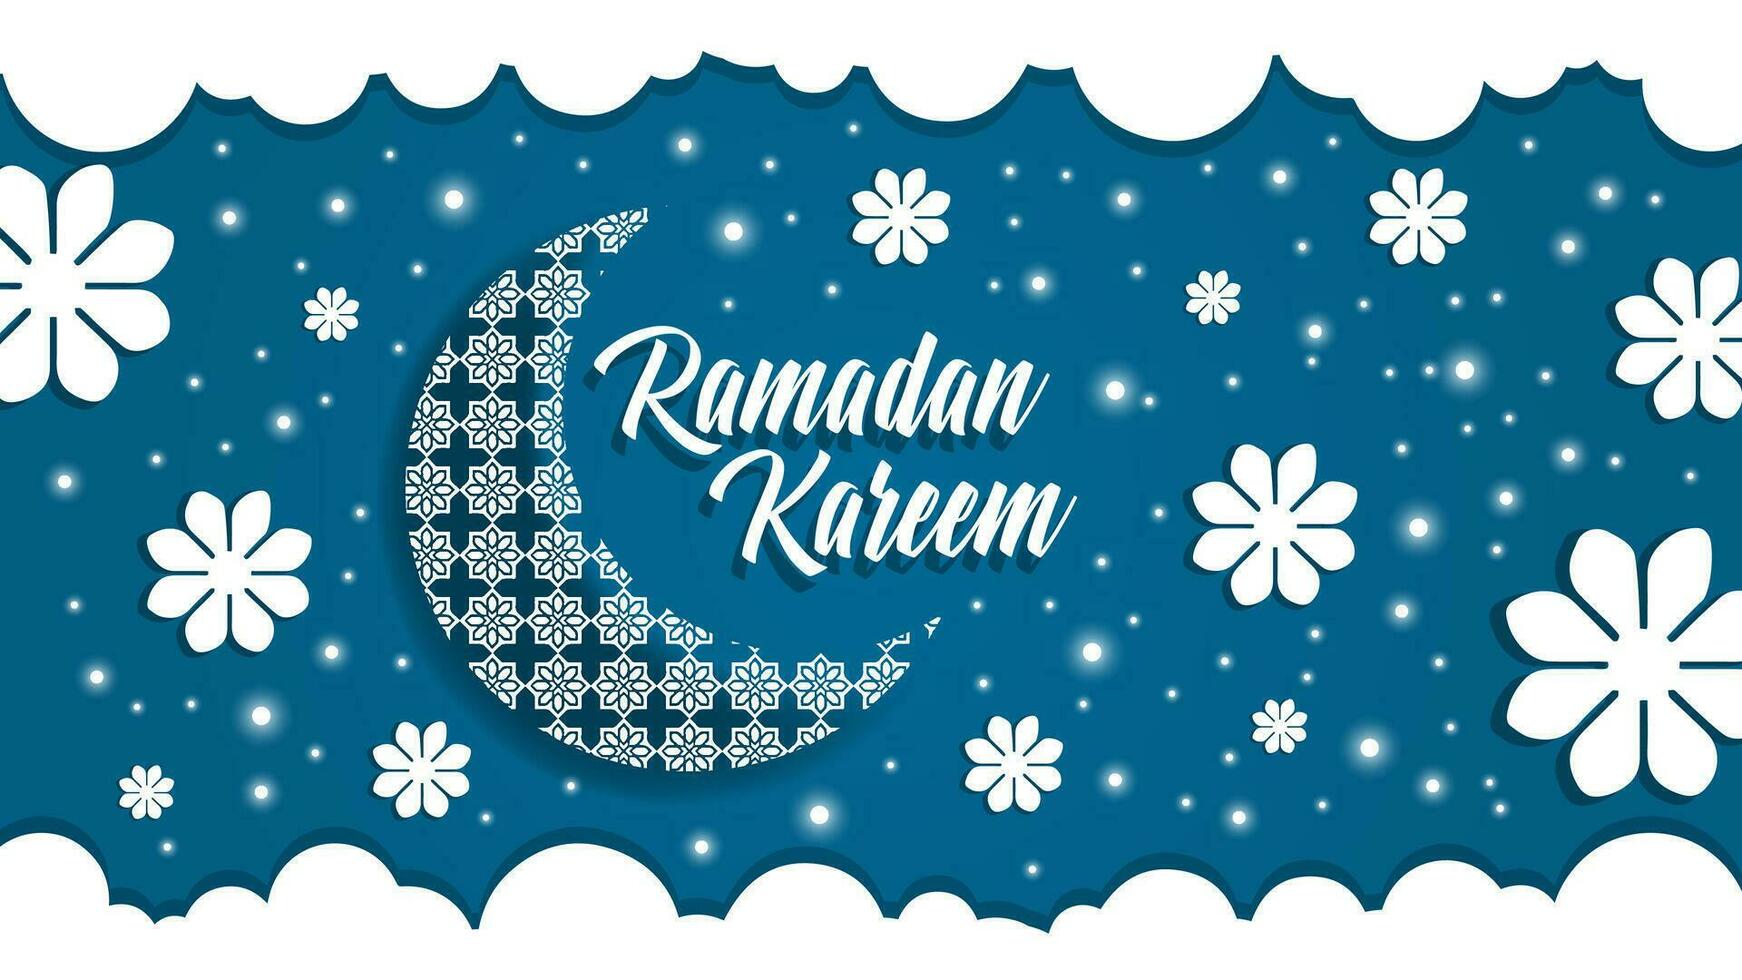 Ramadan greeting card. Illustration of a crescent and famous moon floating in the sky with background. vector illustration